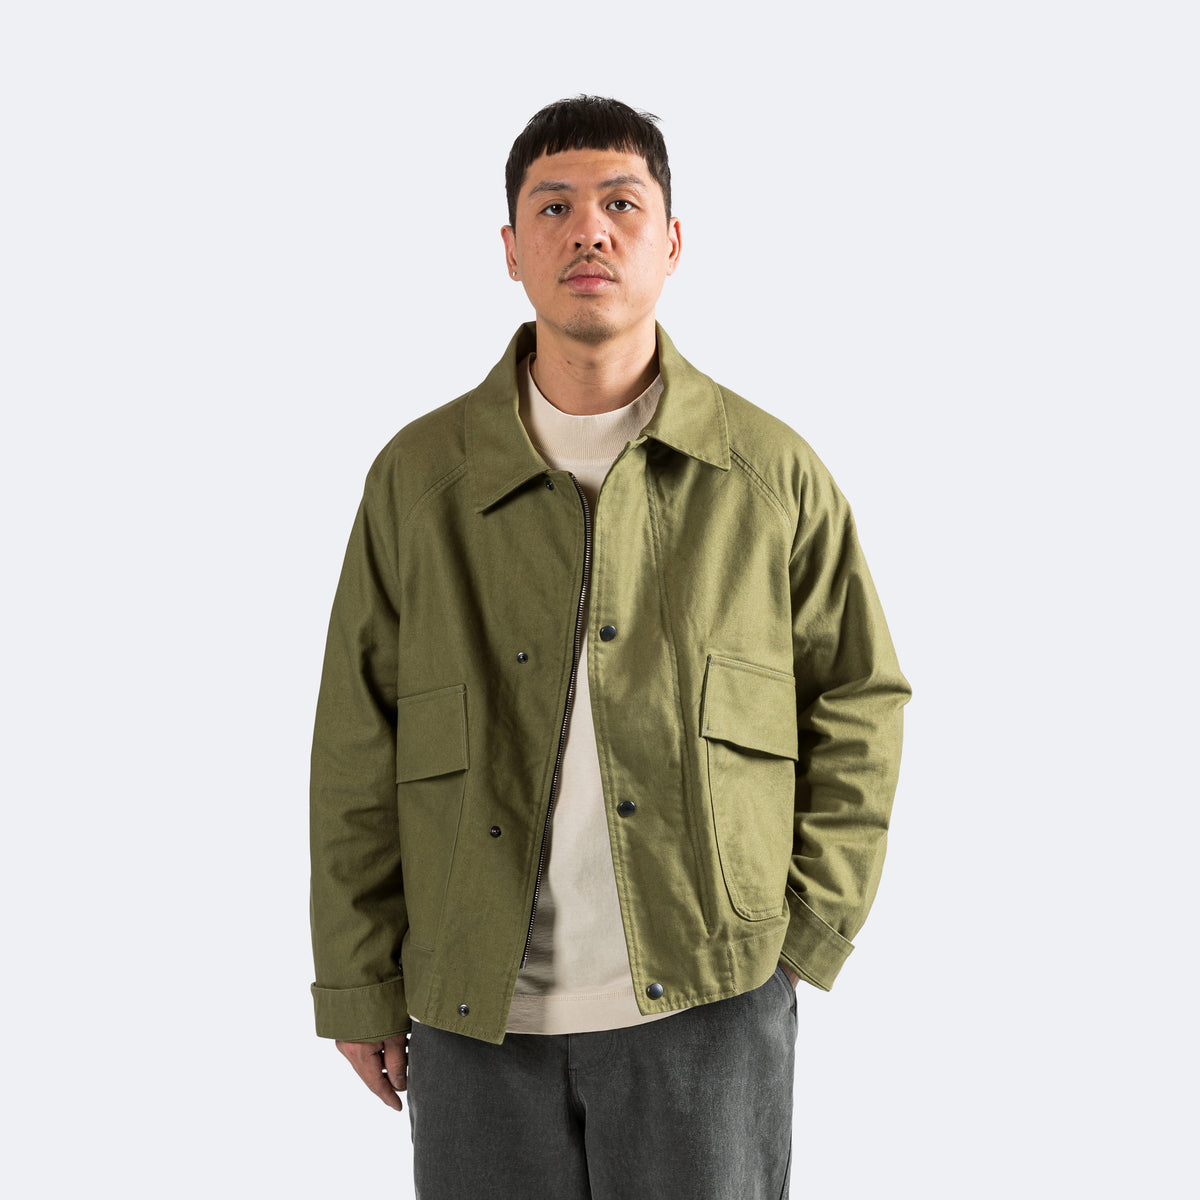 Cropped Worker Jacket - Army Green Dense Cotton Drill